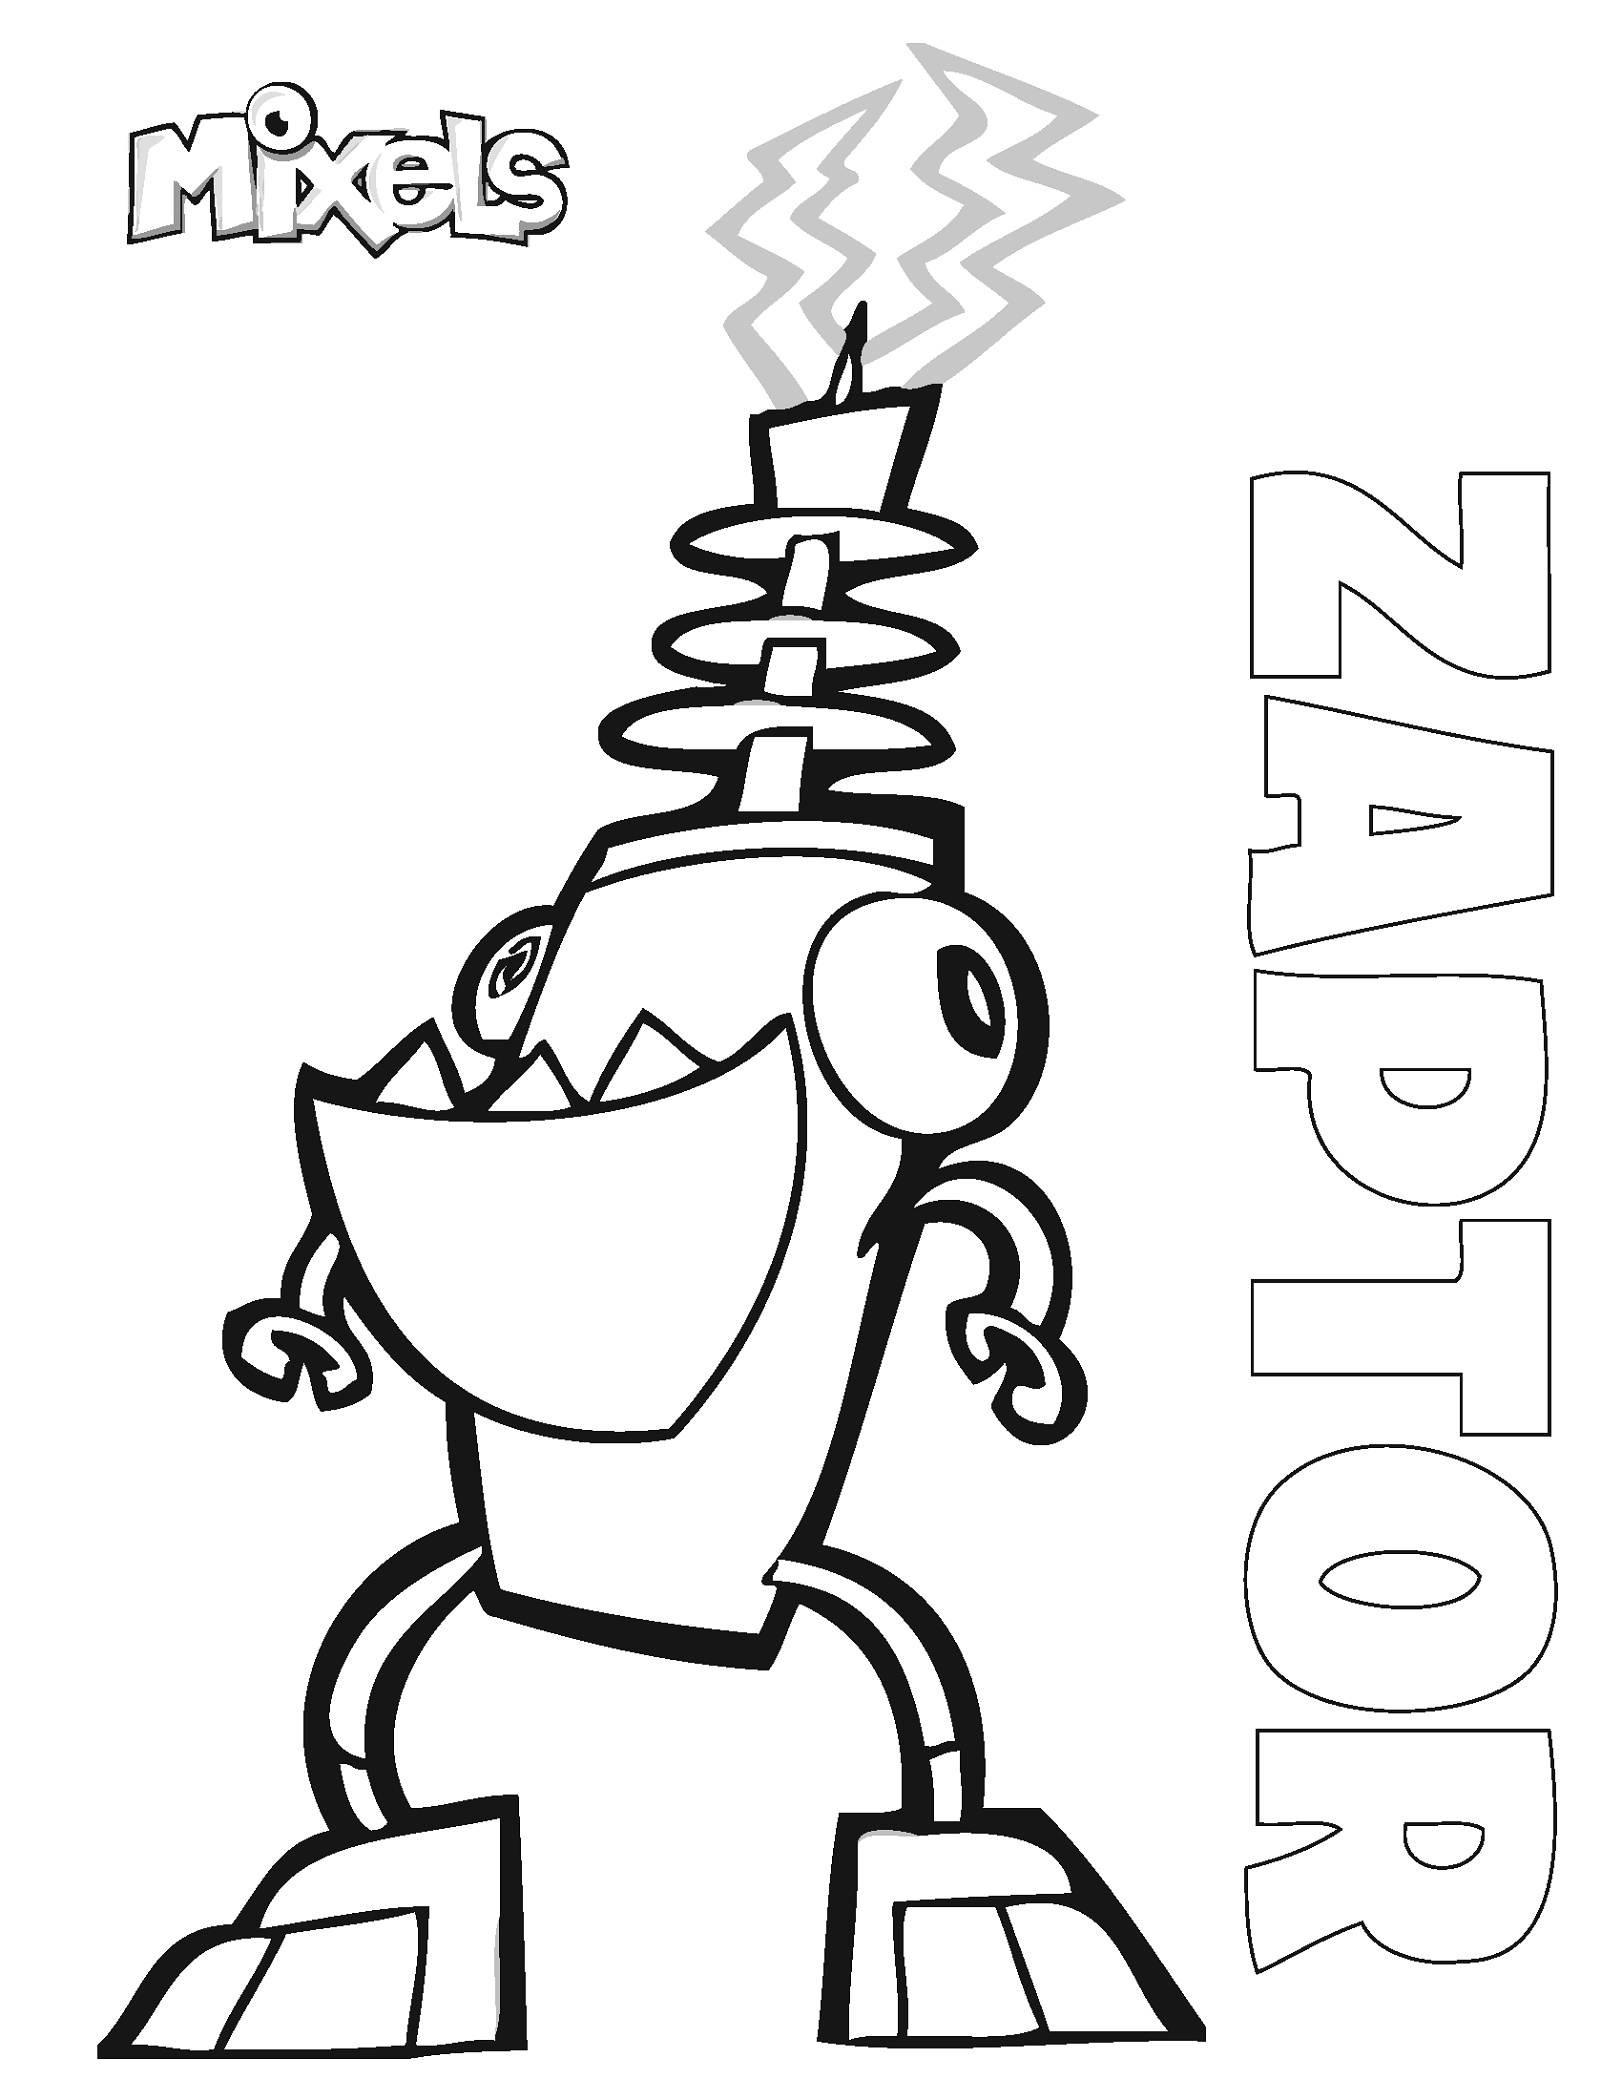 Mixels Coloring Pages Zaptor